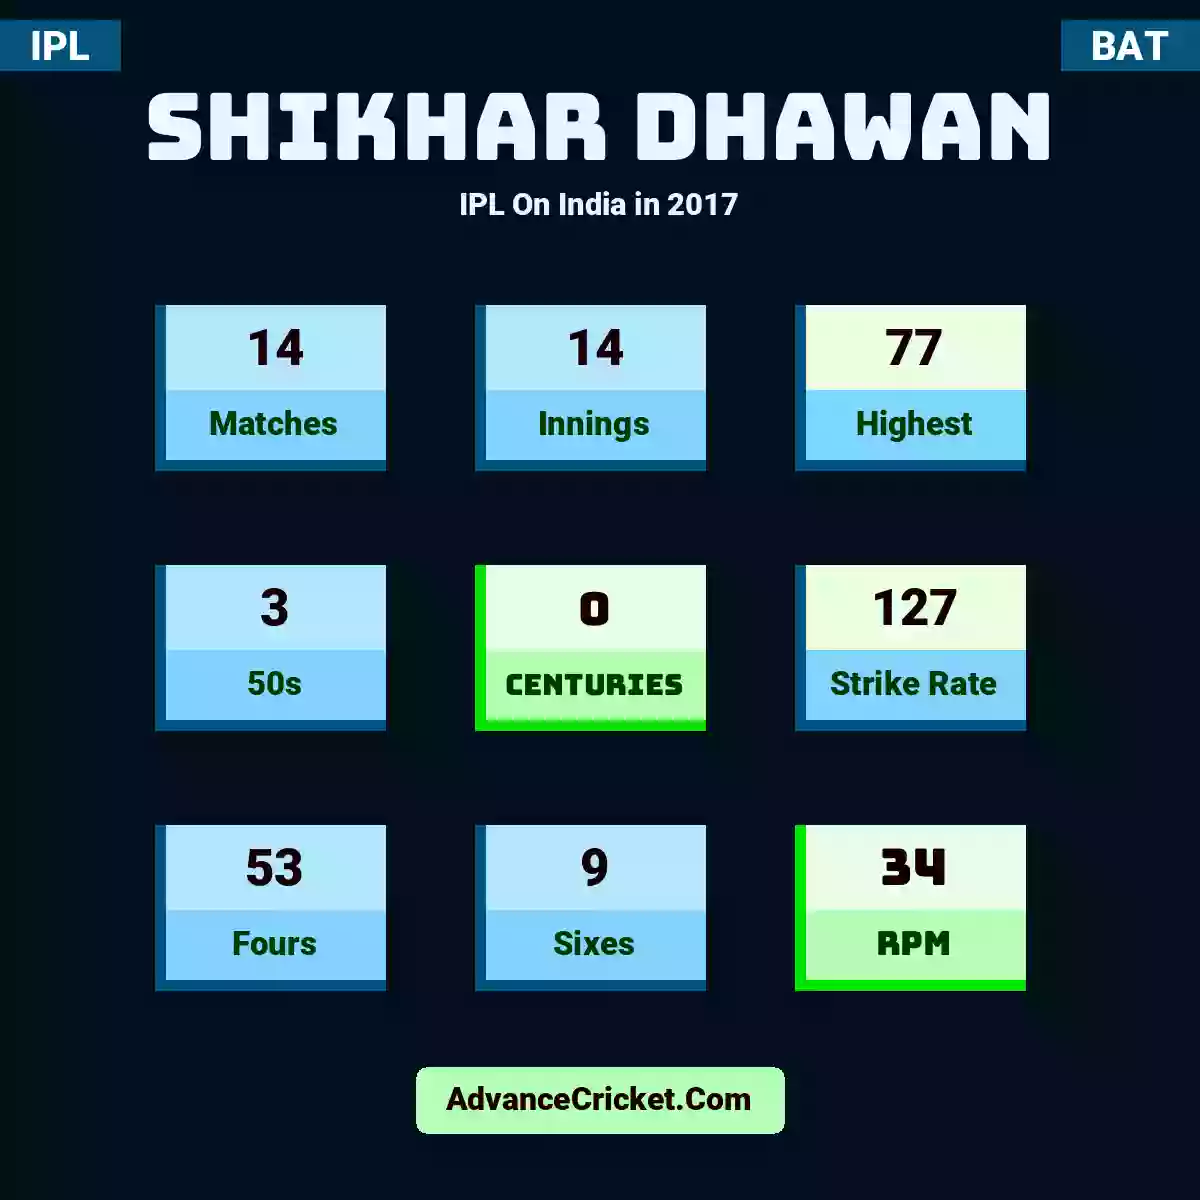 Shikhar Dhawan IPL  On India in 2017, Shikhar Dhawan played 14 matches, scored 77 runs as highest, 3 half-centuries, and 0 centuries, with a strike rate of 127. S.Dhawan hit 53 fours and 9 sixes, with an RPM of 34.